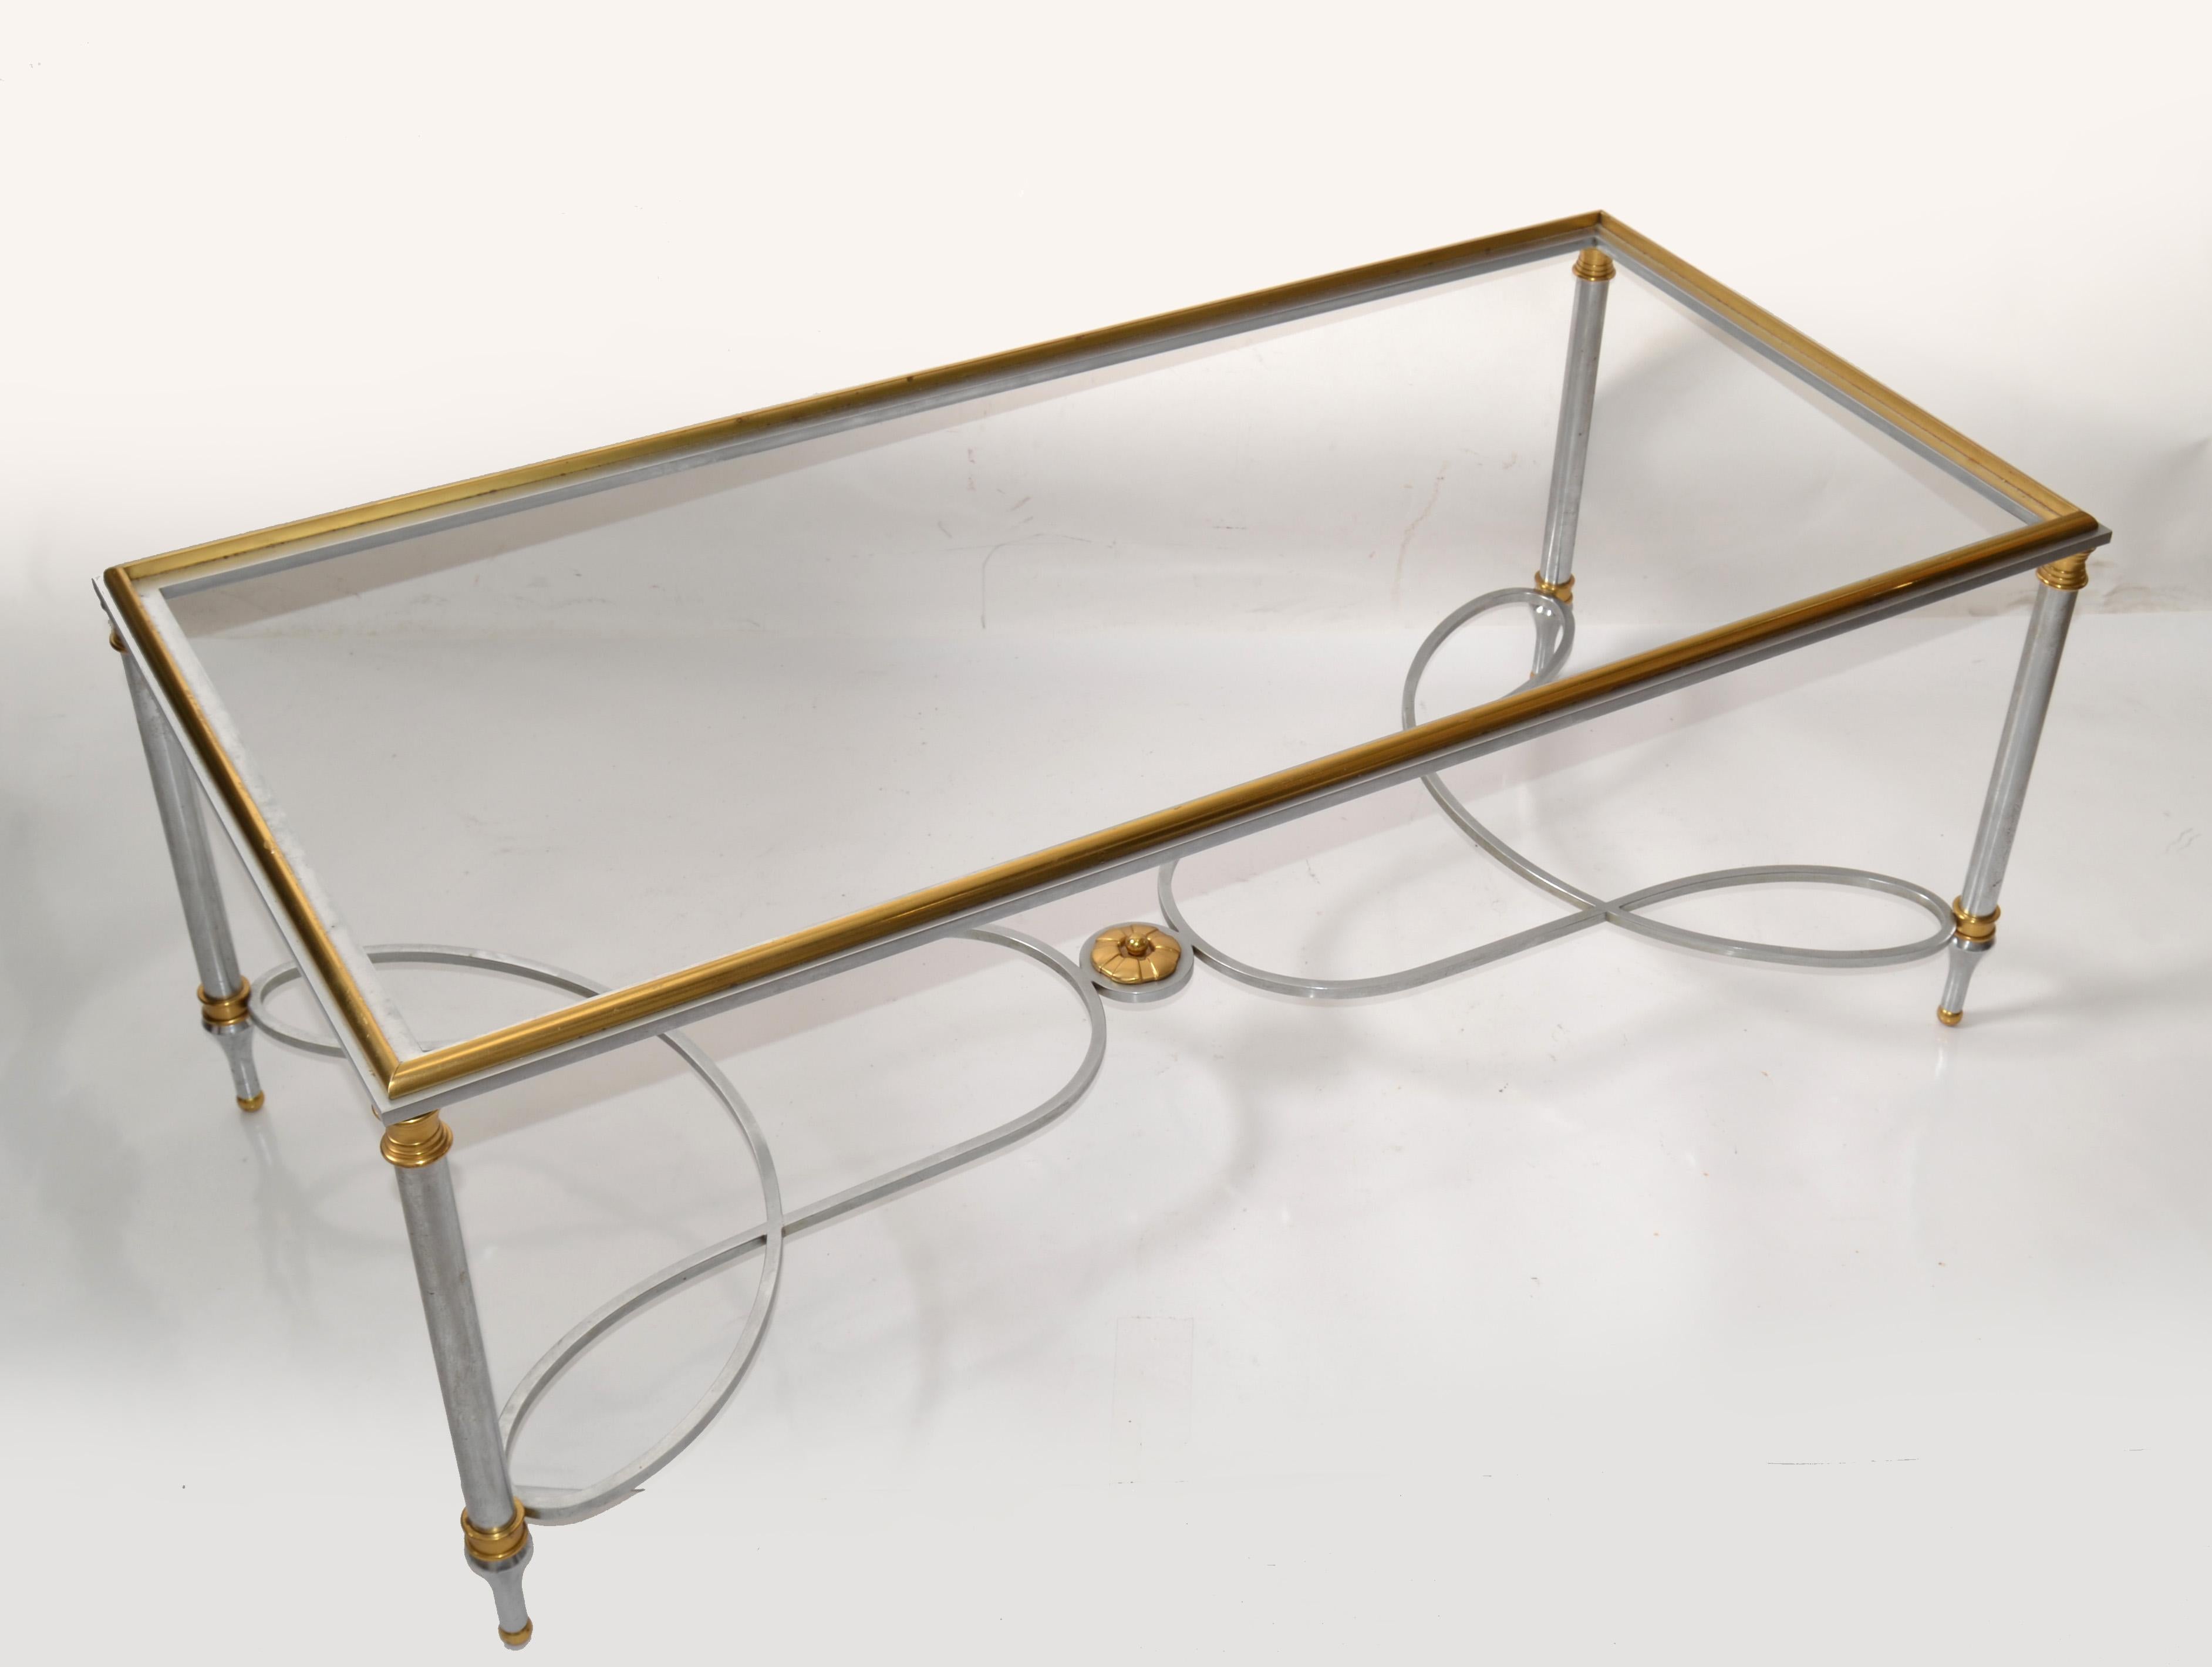 1970s Maison Charles French Steel Brass Glass Coffee Table Mid-Century Modern  For Sale 6